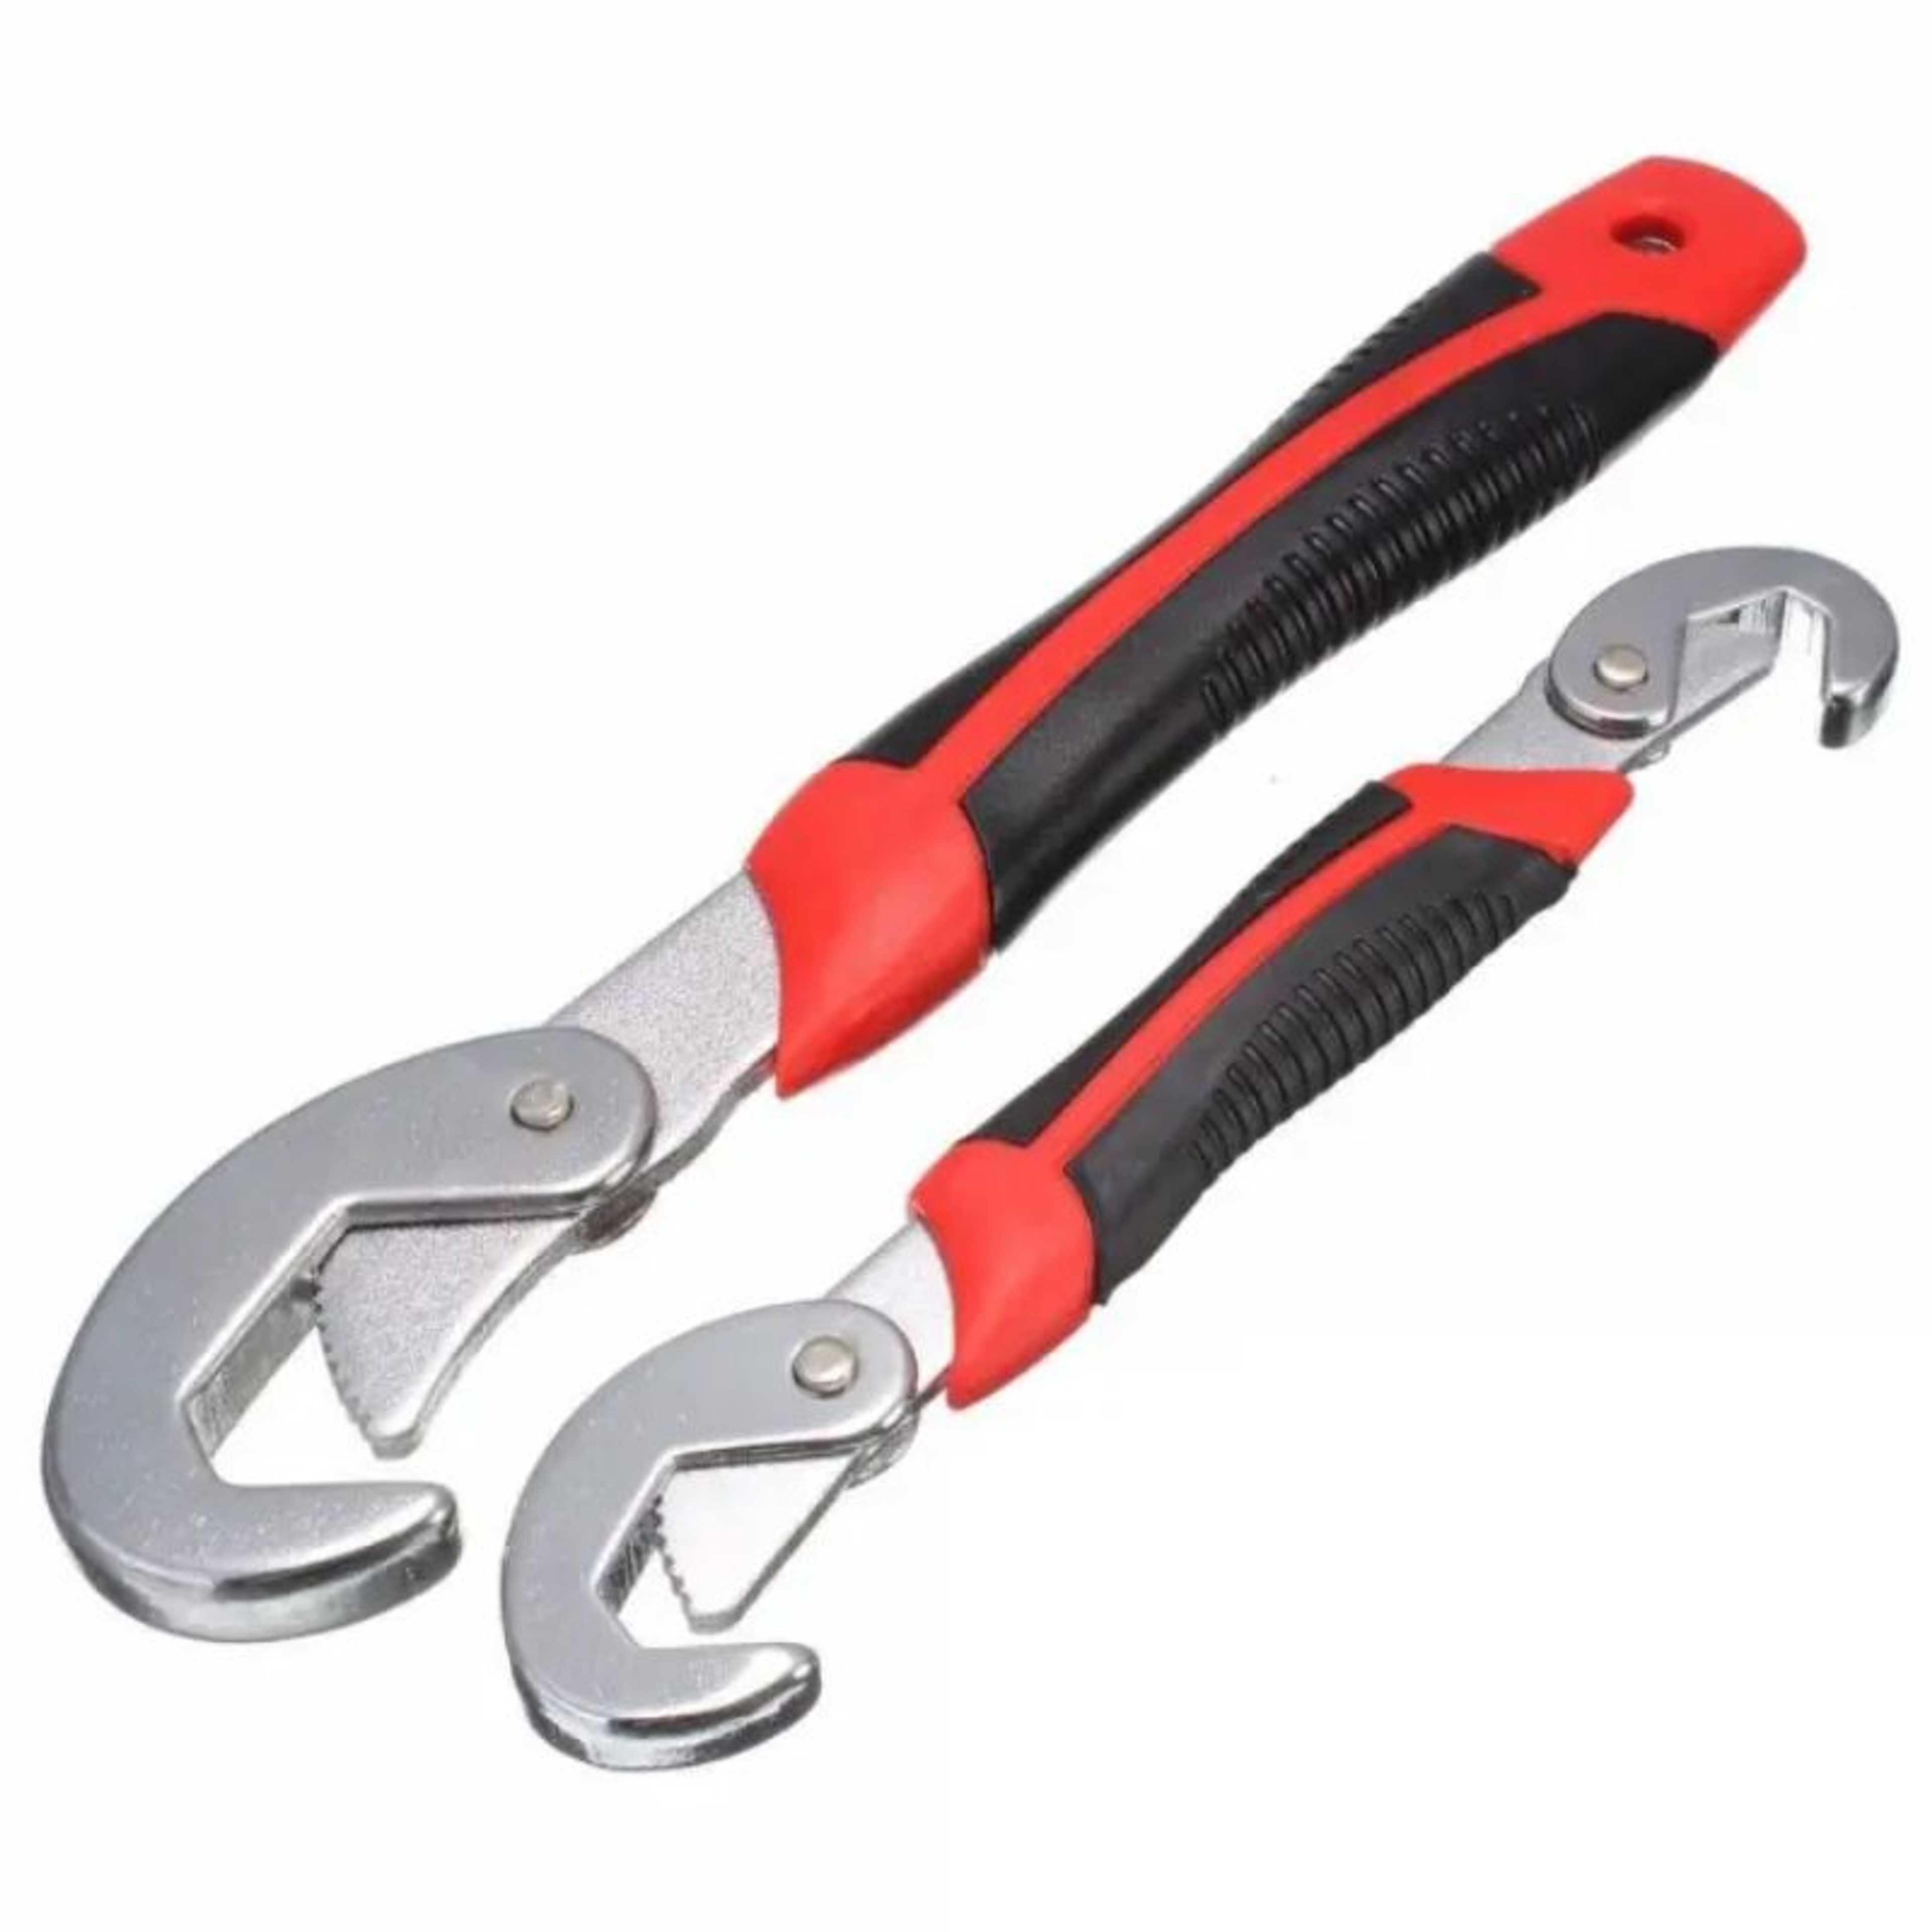 Adjustable Wrench - Red & Black